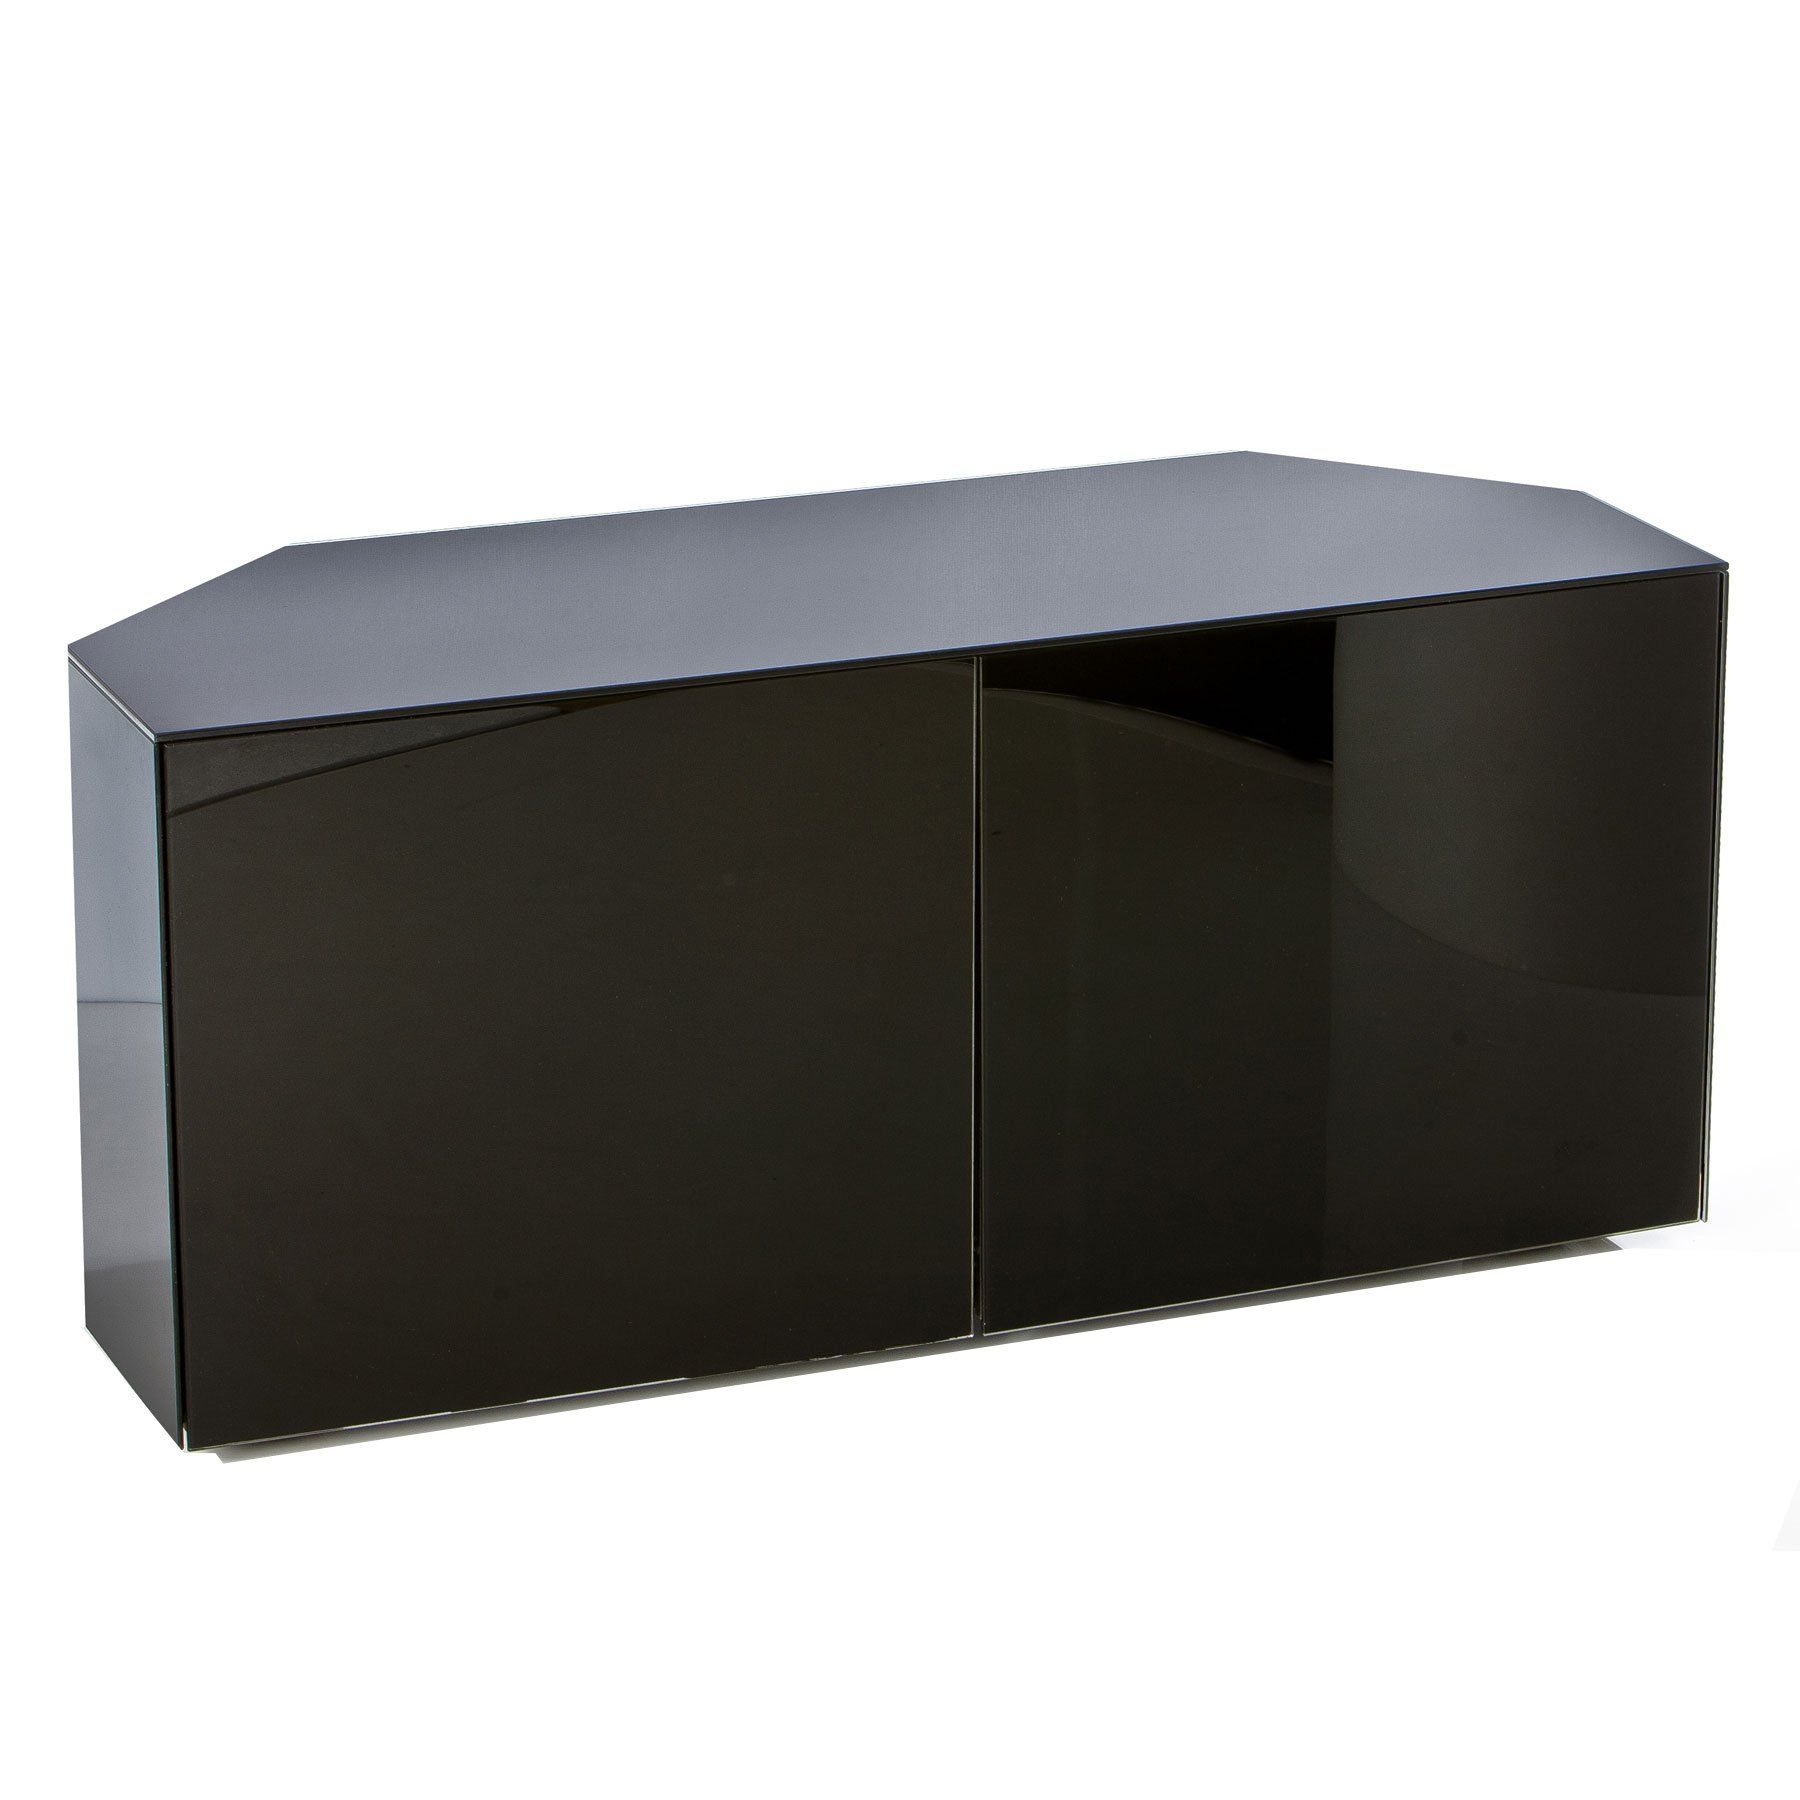 Invictus Black High Gloss Corner Tv Stand For Up To 55" Tvs Intended For Tv Cabinets Black High Gloss (Photo 4 of 15)